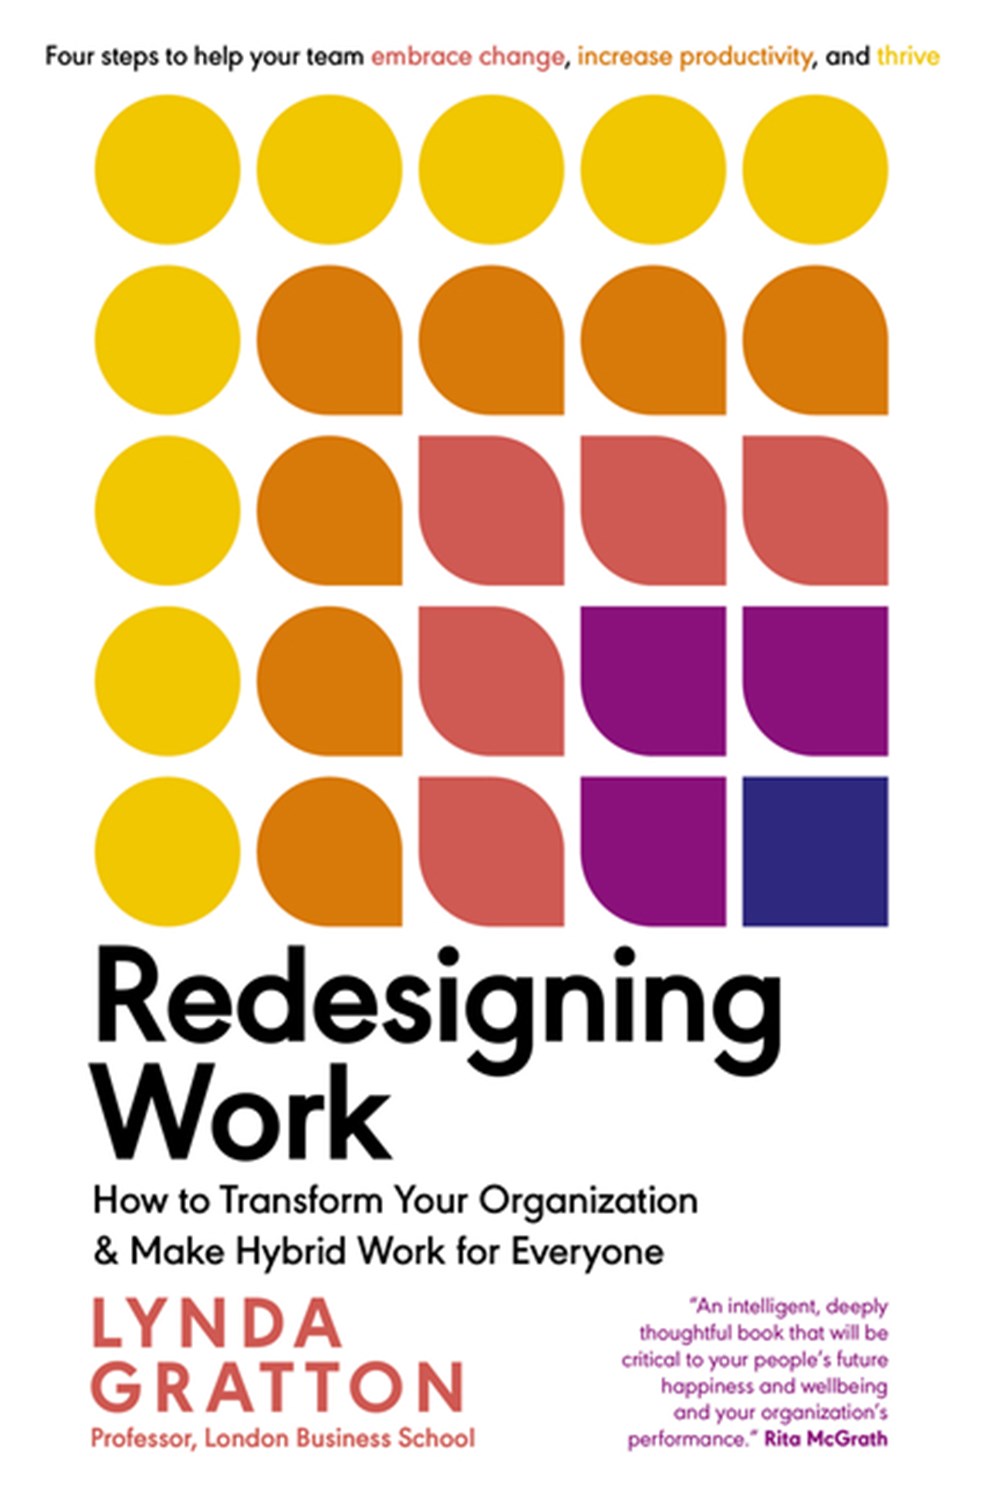 Redesigning Work: How to Transform Your Organization and Make Hybrid Work for Everyone